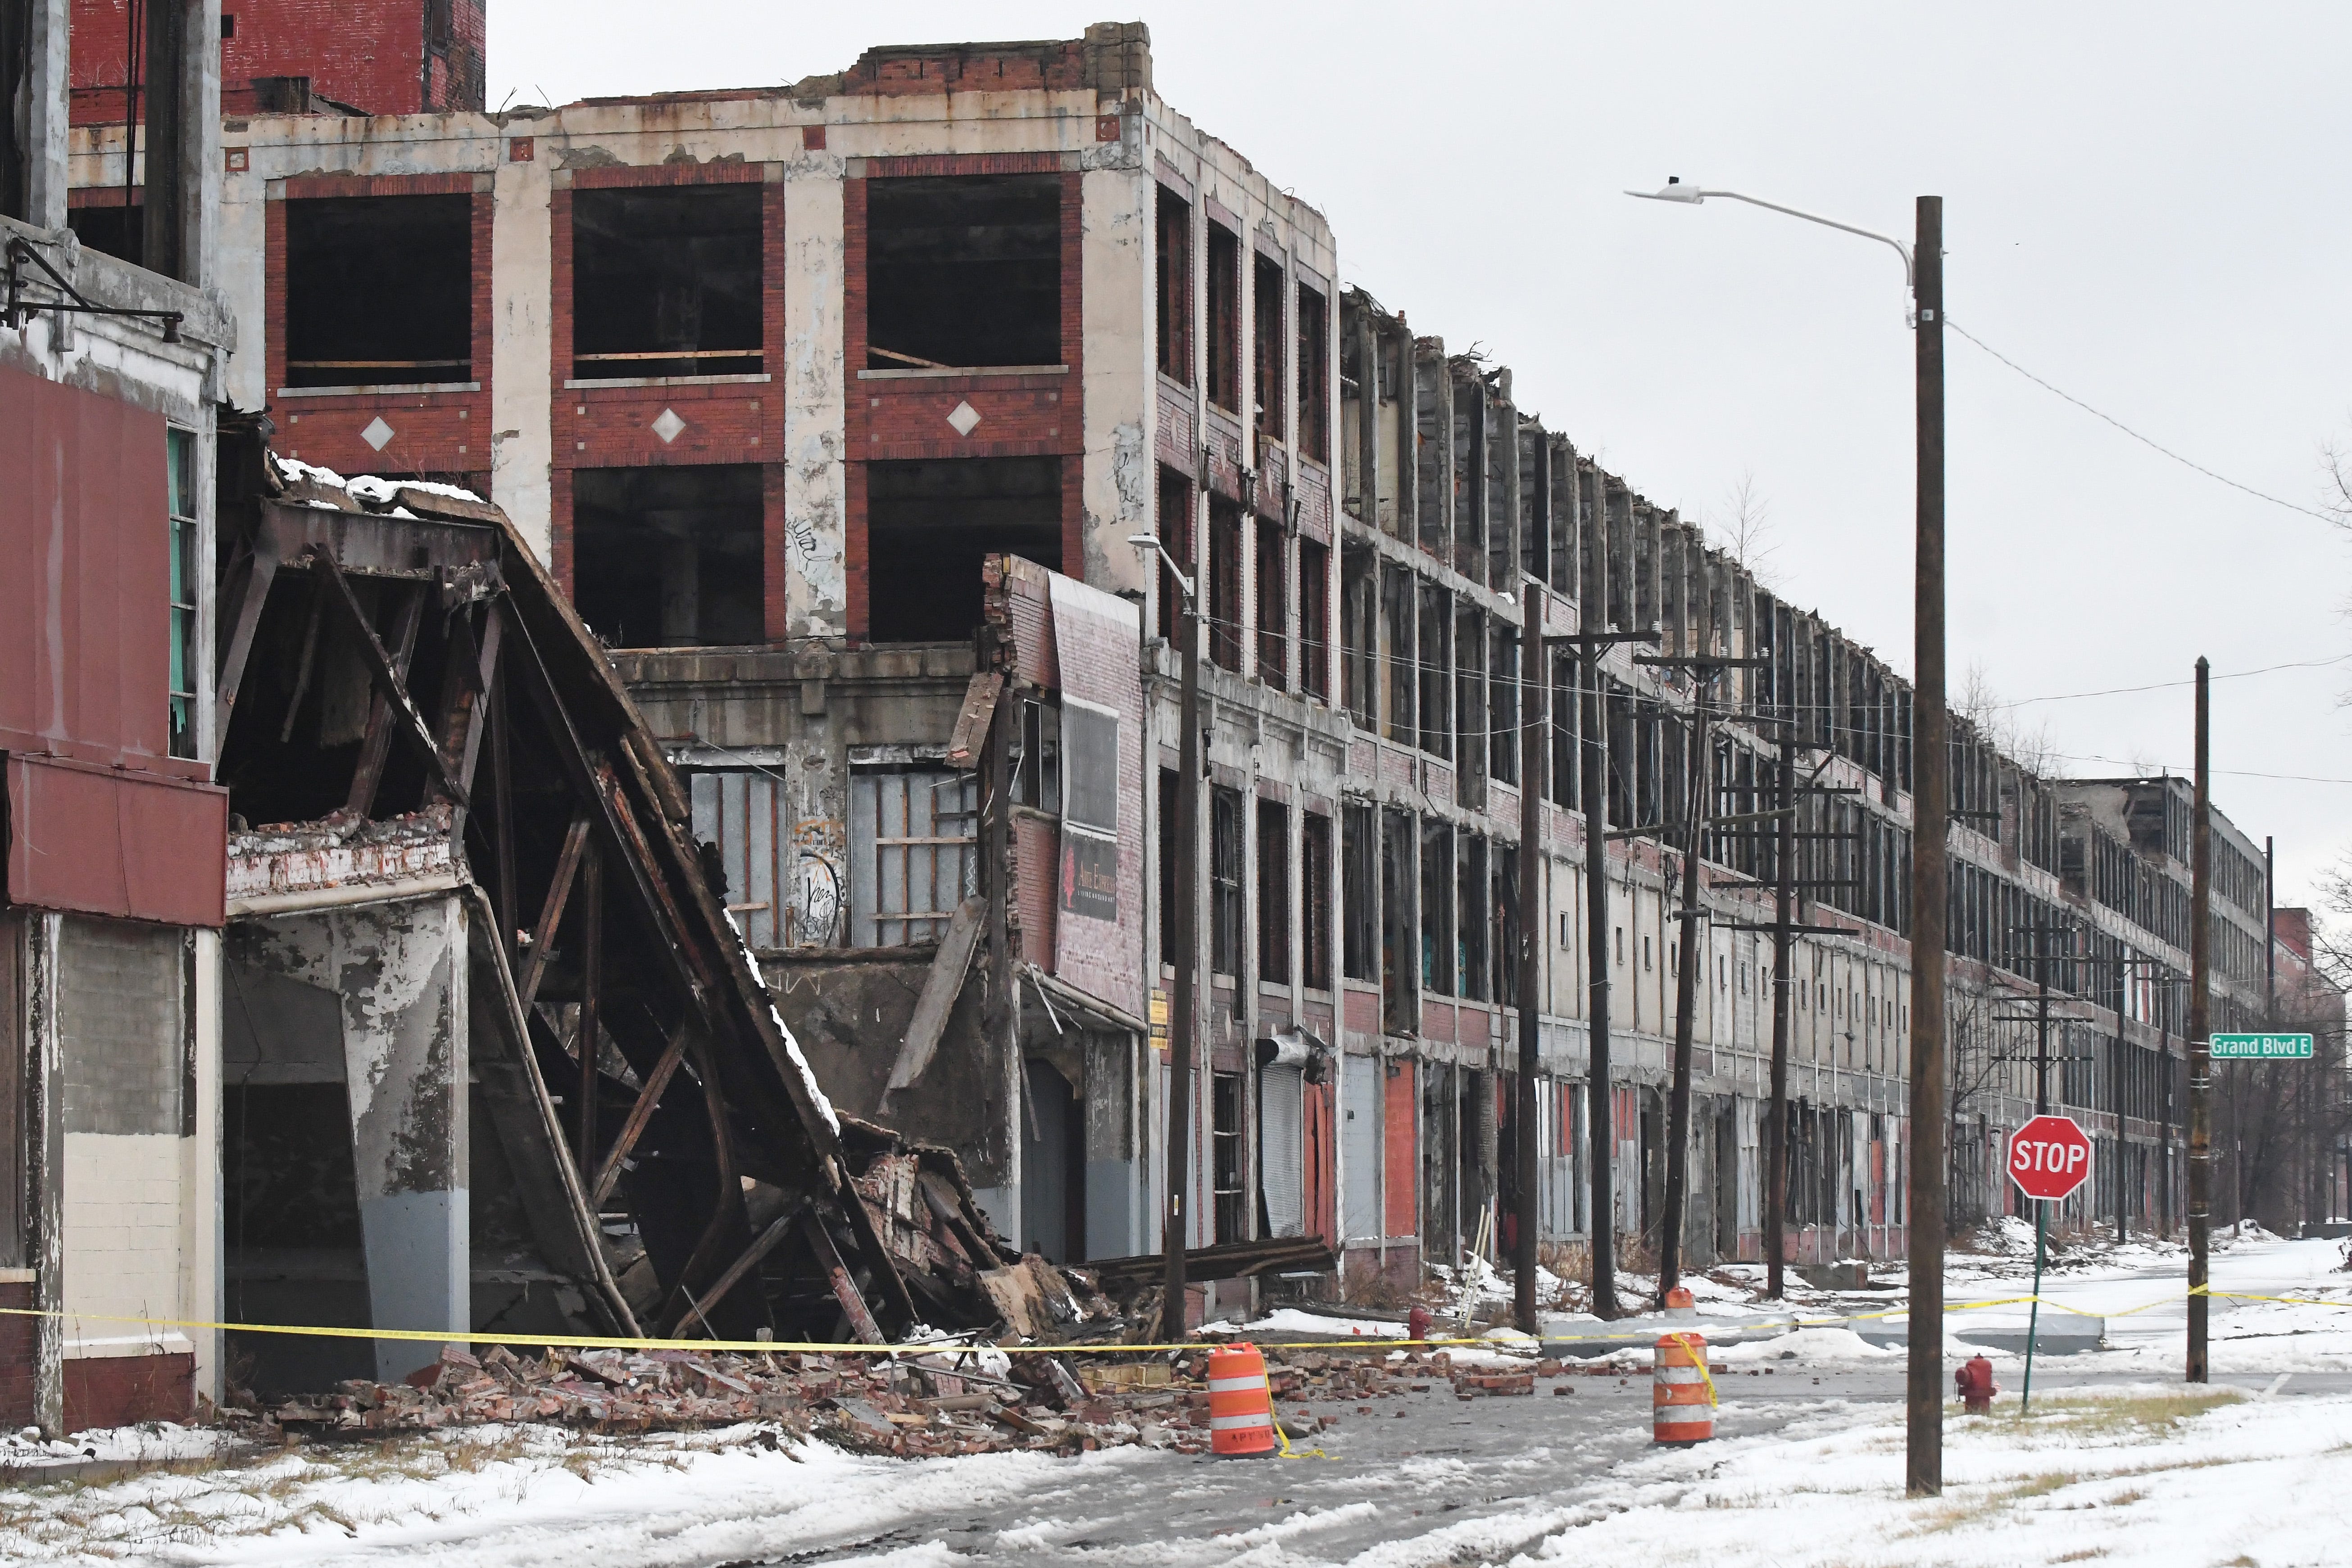 Packard Plant bridge collapses over E. Grand Blvd., looking North, in Detroit, Michigan on January 23, 2019.